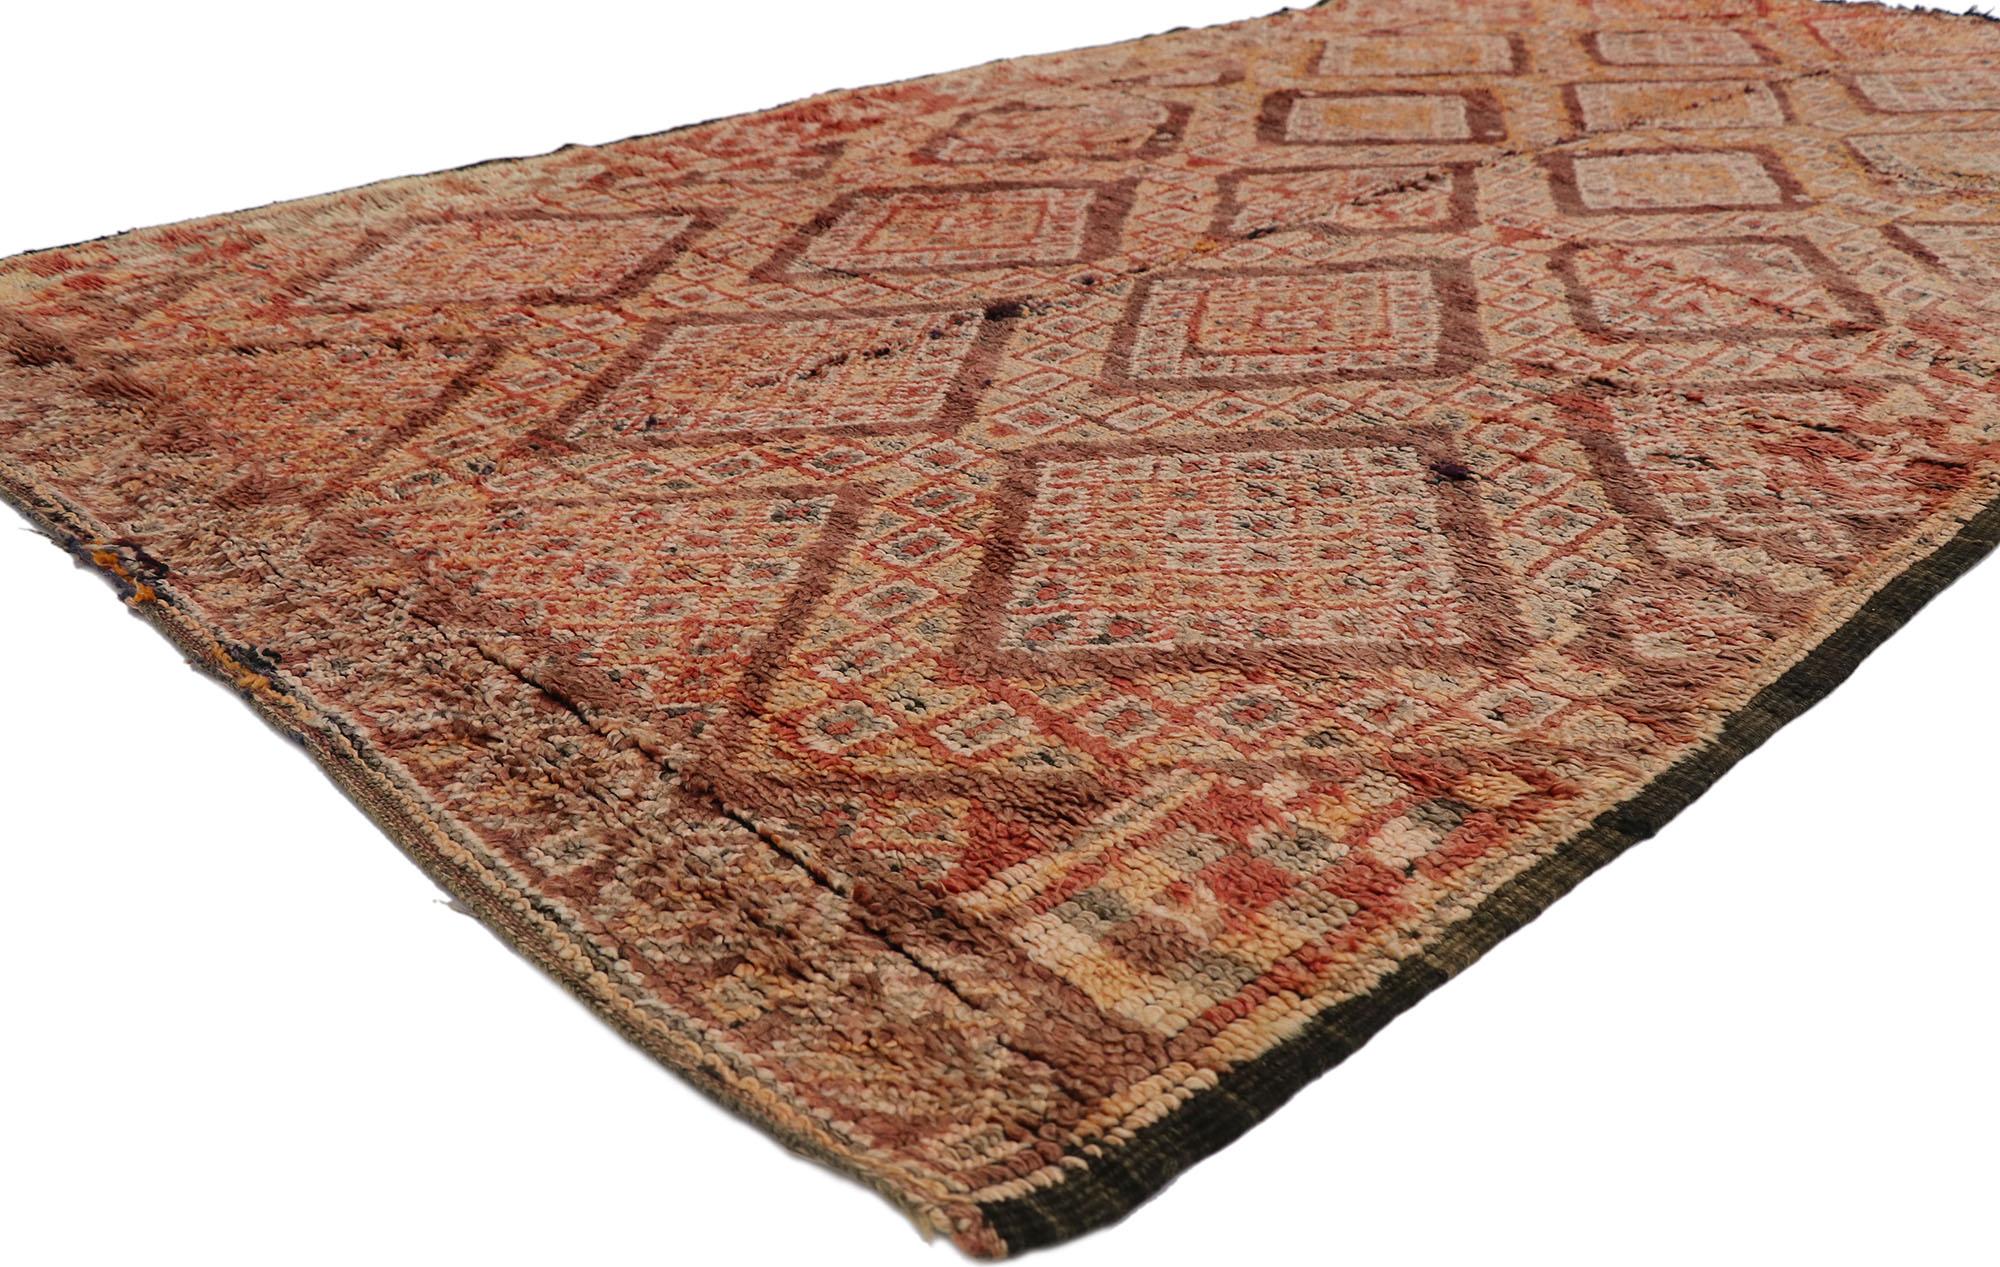 21330 Vintage Beni MGuild Moroccan Rug, 05'06 x 09'11. Originating from the Beni M'Guild tribe nestled in Morocco's Middle Atlas Mountains, Beni M'Guild rugs embody a cherished tradition meticulously handcrafted by skilled Berber women. These rugs